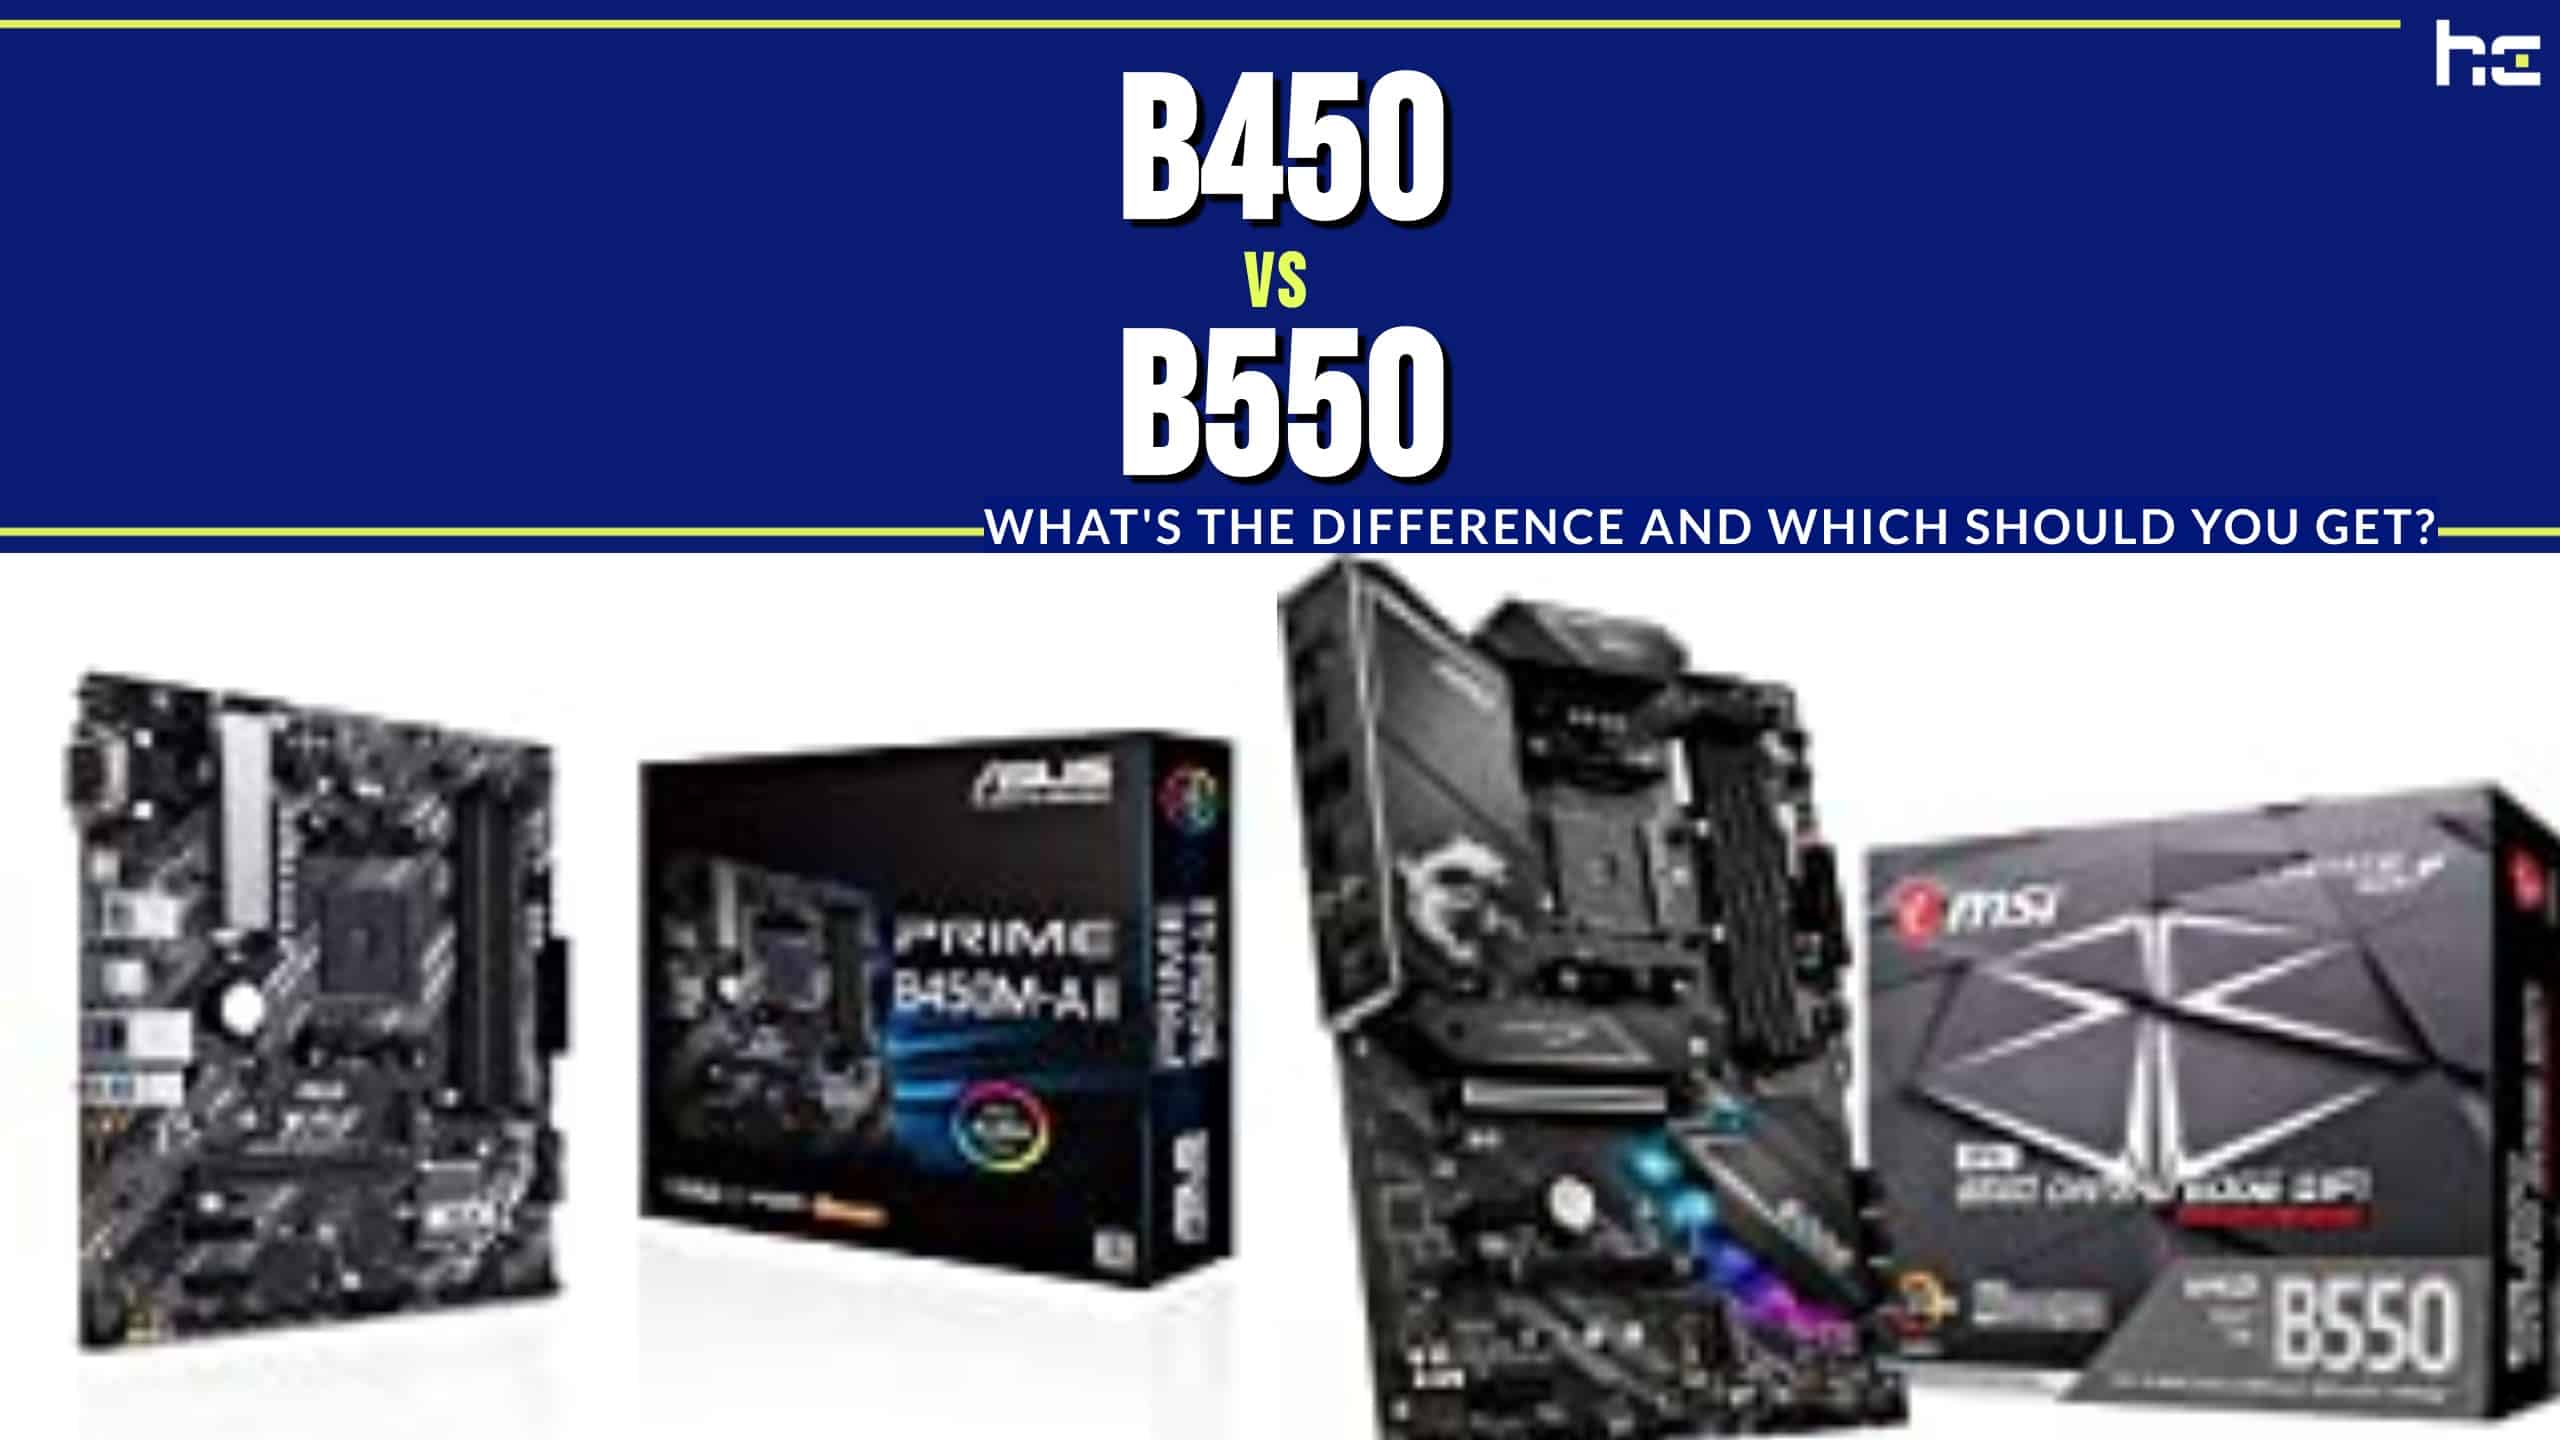 B450 vs. B550: What's the Difference and Which Should You Get